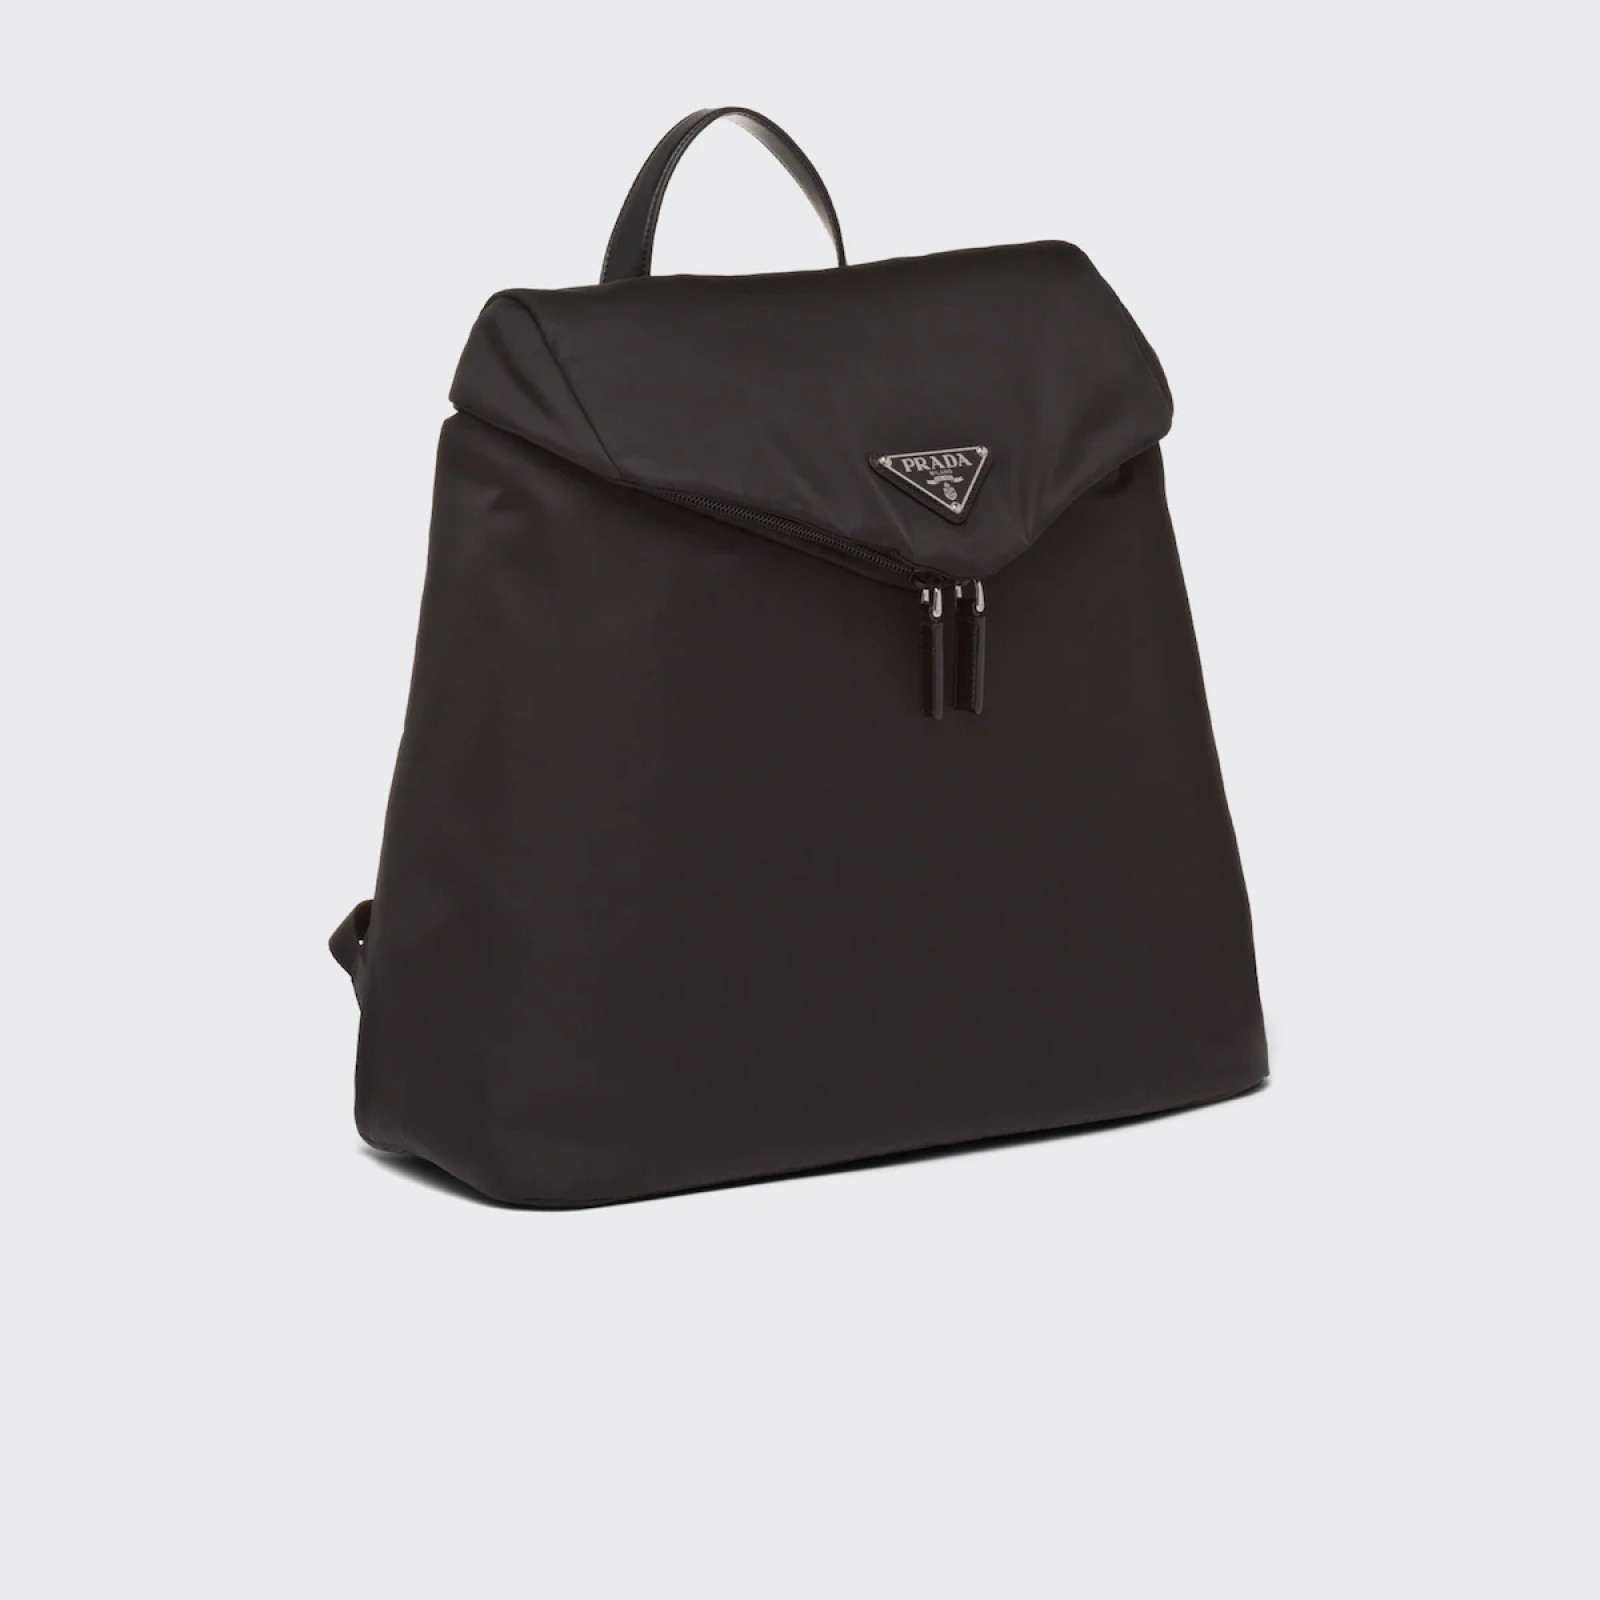 Re-Nylon and leather backpack